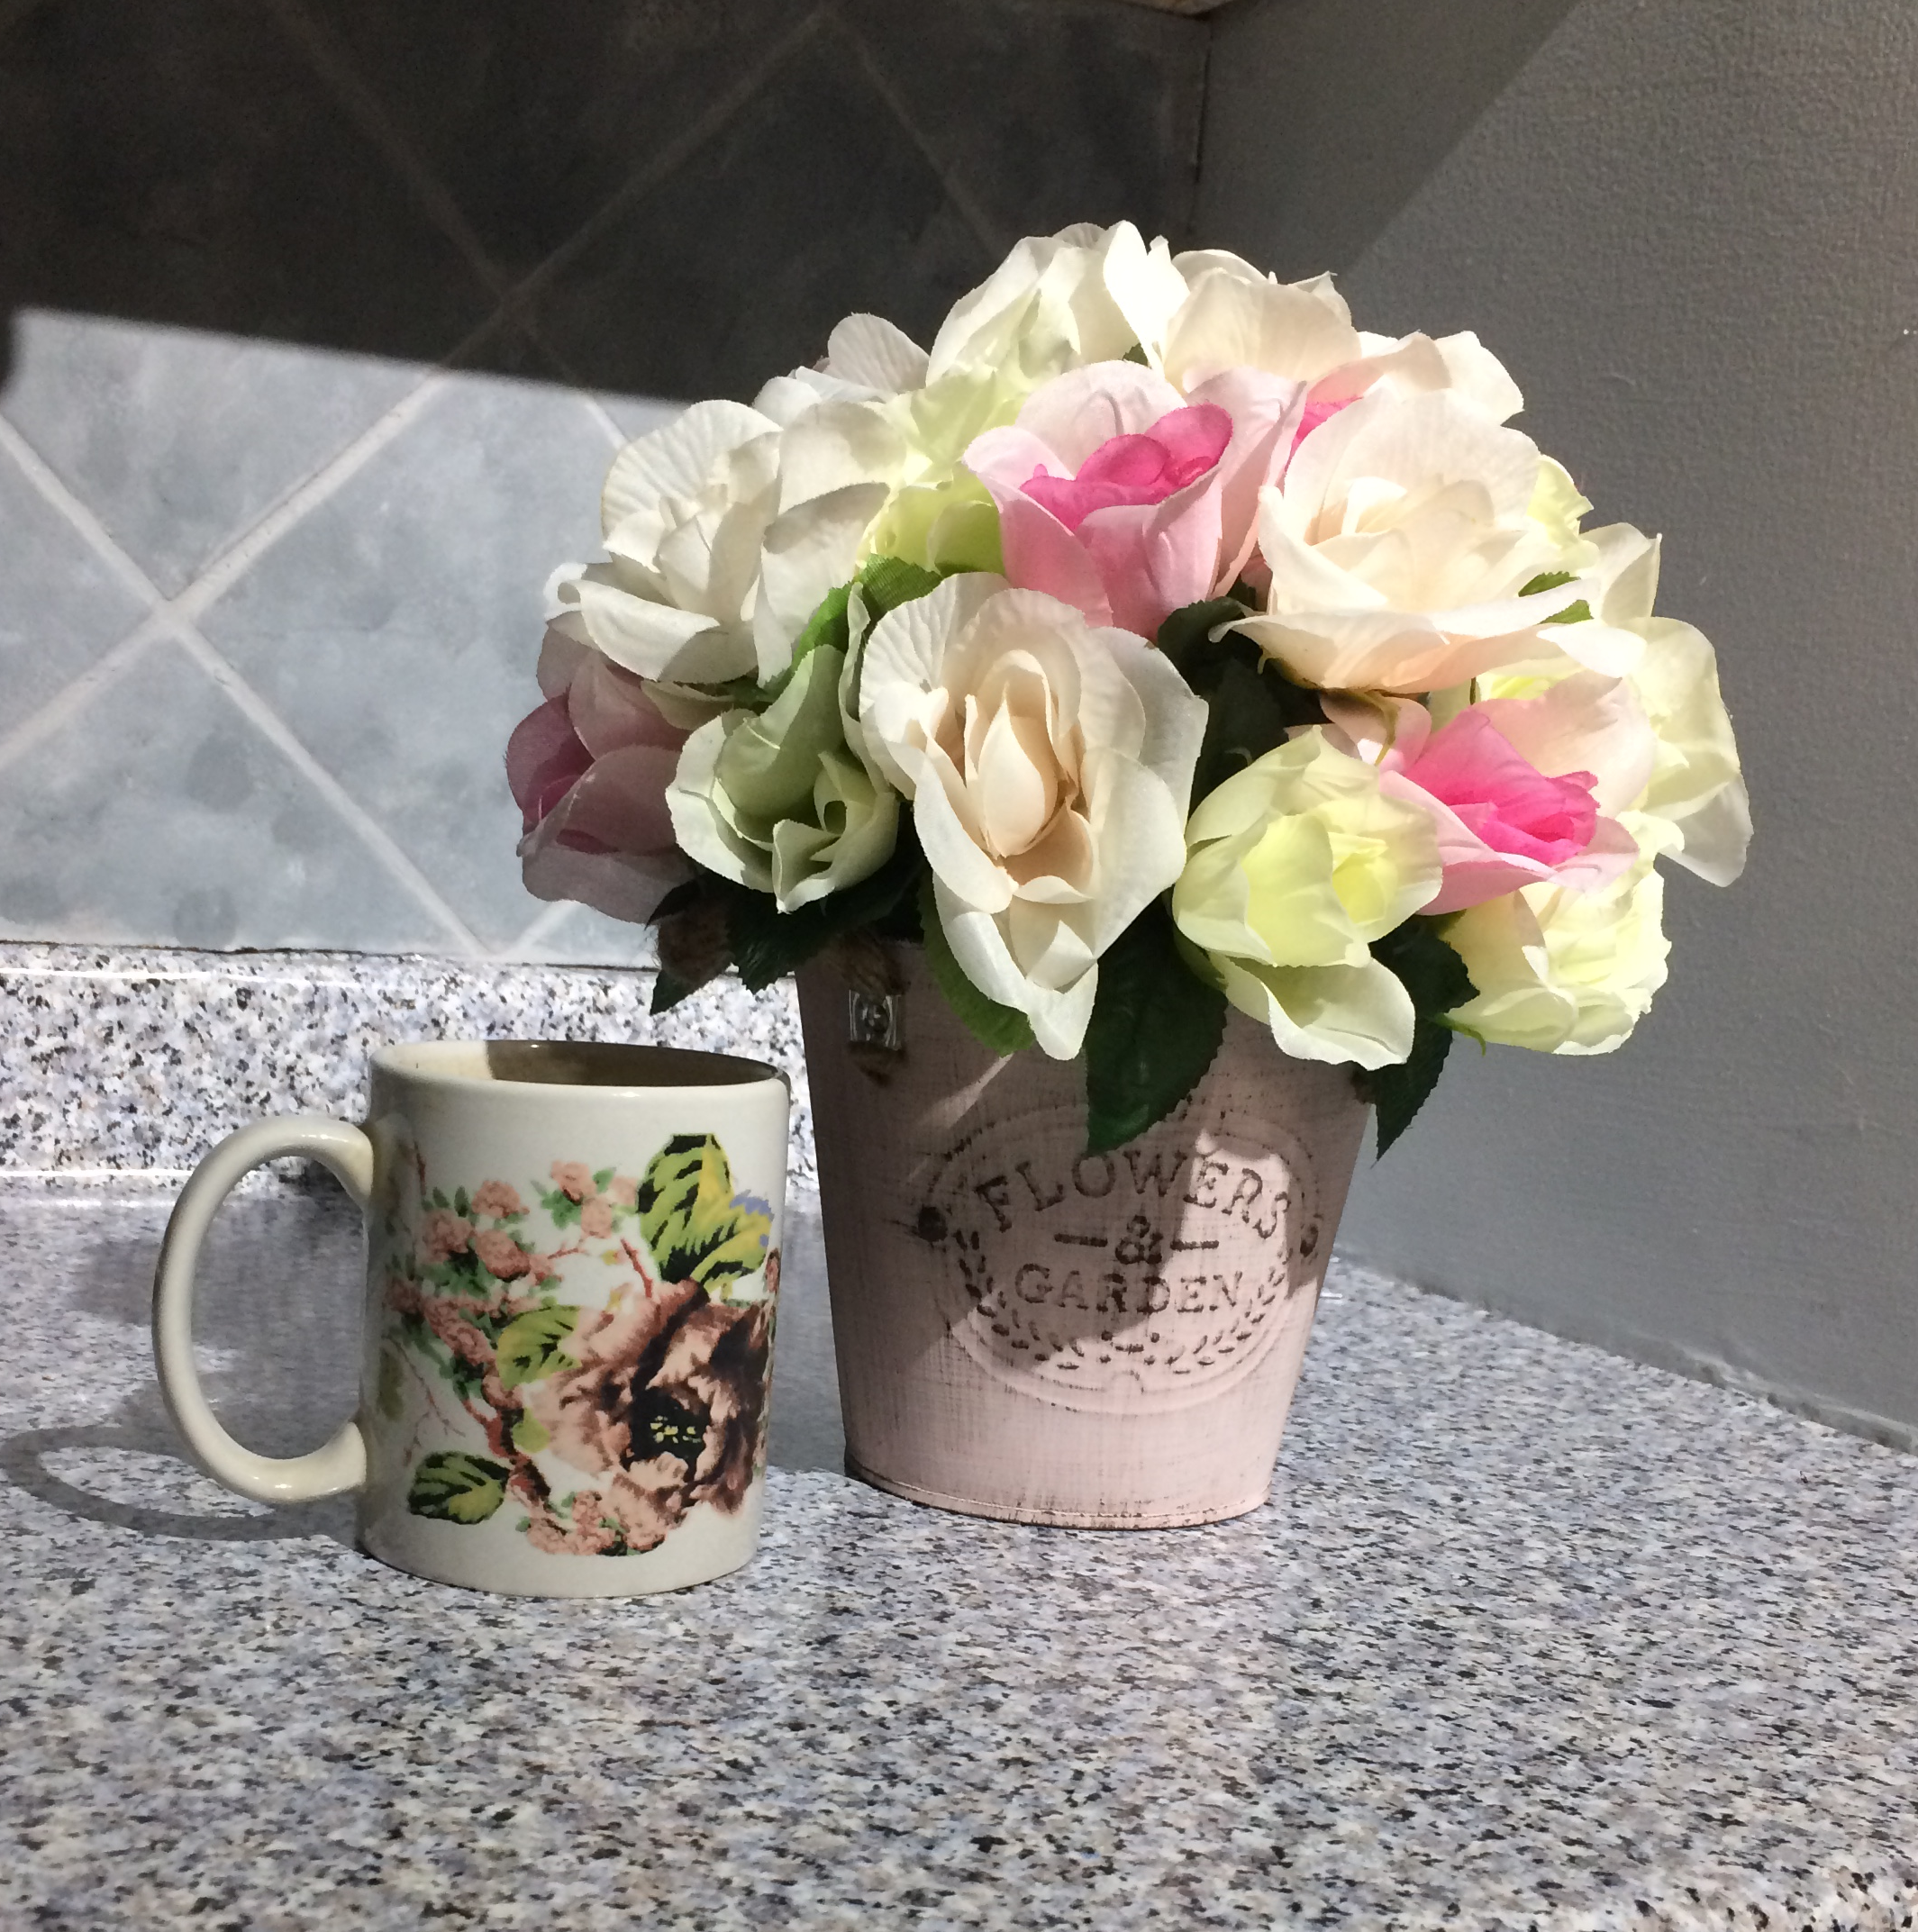 Creating a Fancy Bucket Full of Roses for Less than $10